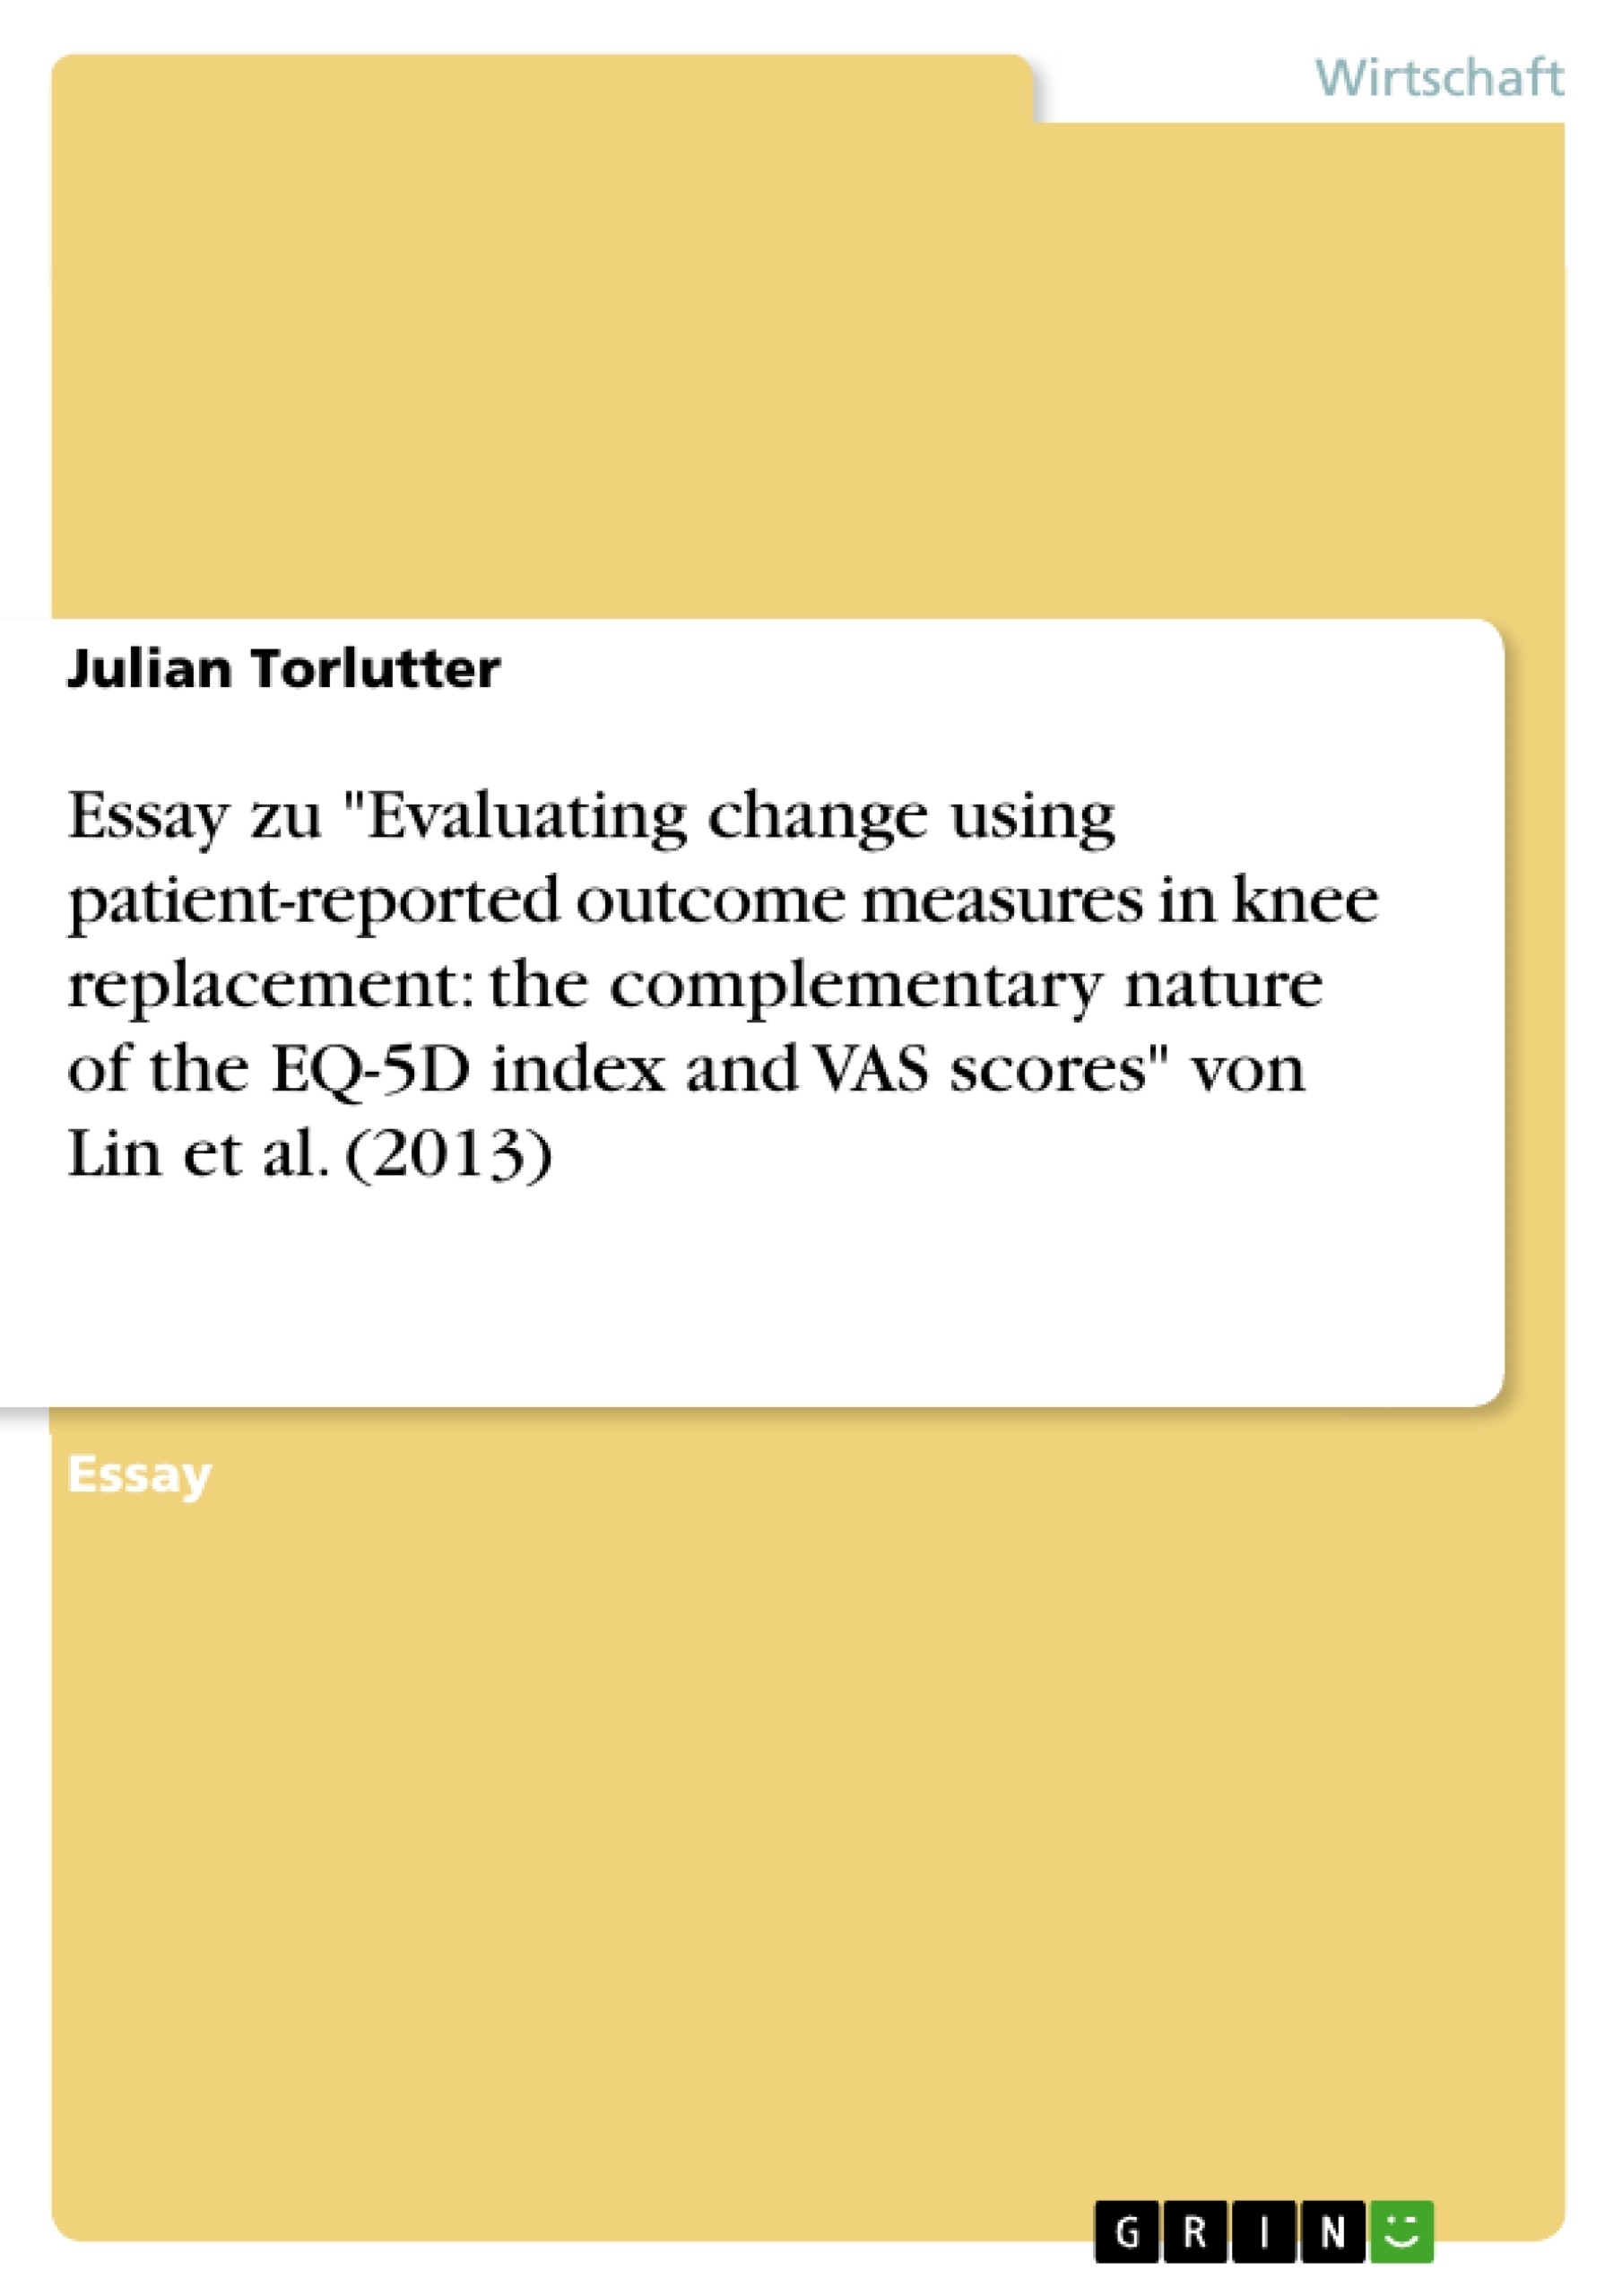 Title: Essay zu "Evaluating change using patient-reported outcome measures in knee replacement: the complementary nature of the EQ-5D index and VAS scores" von Lin et al. (2013)